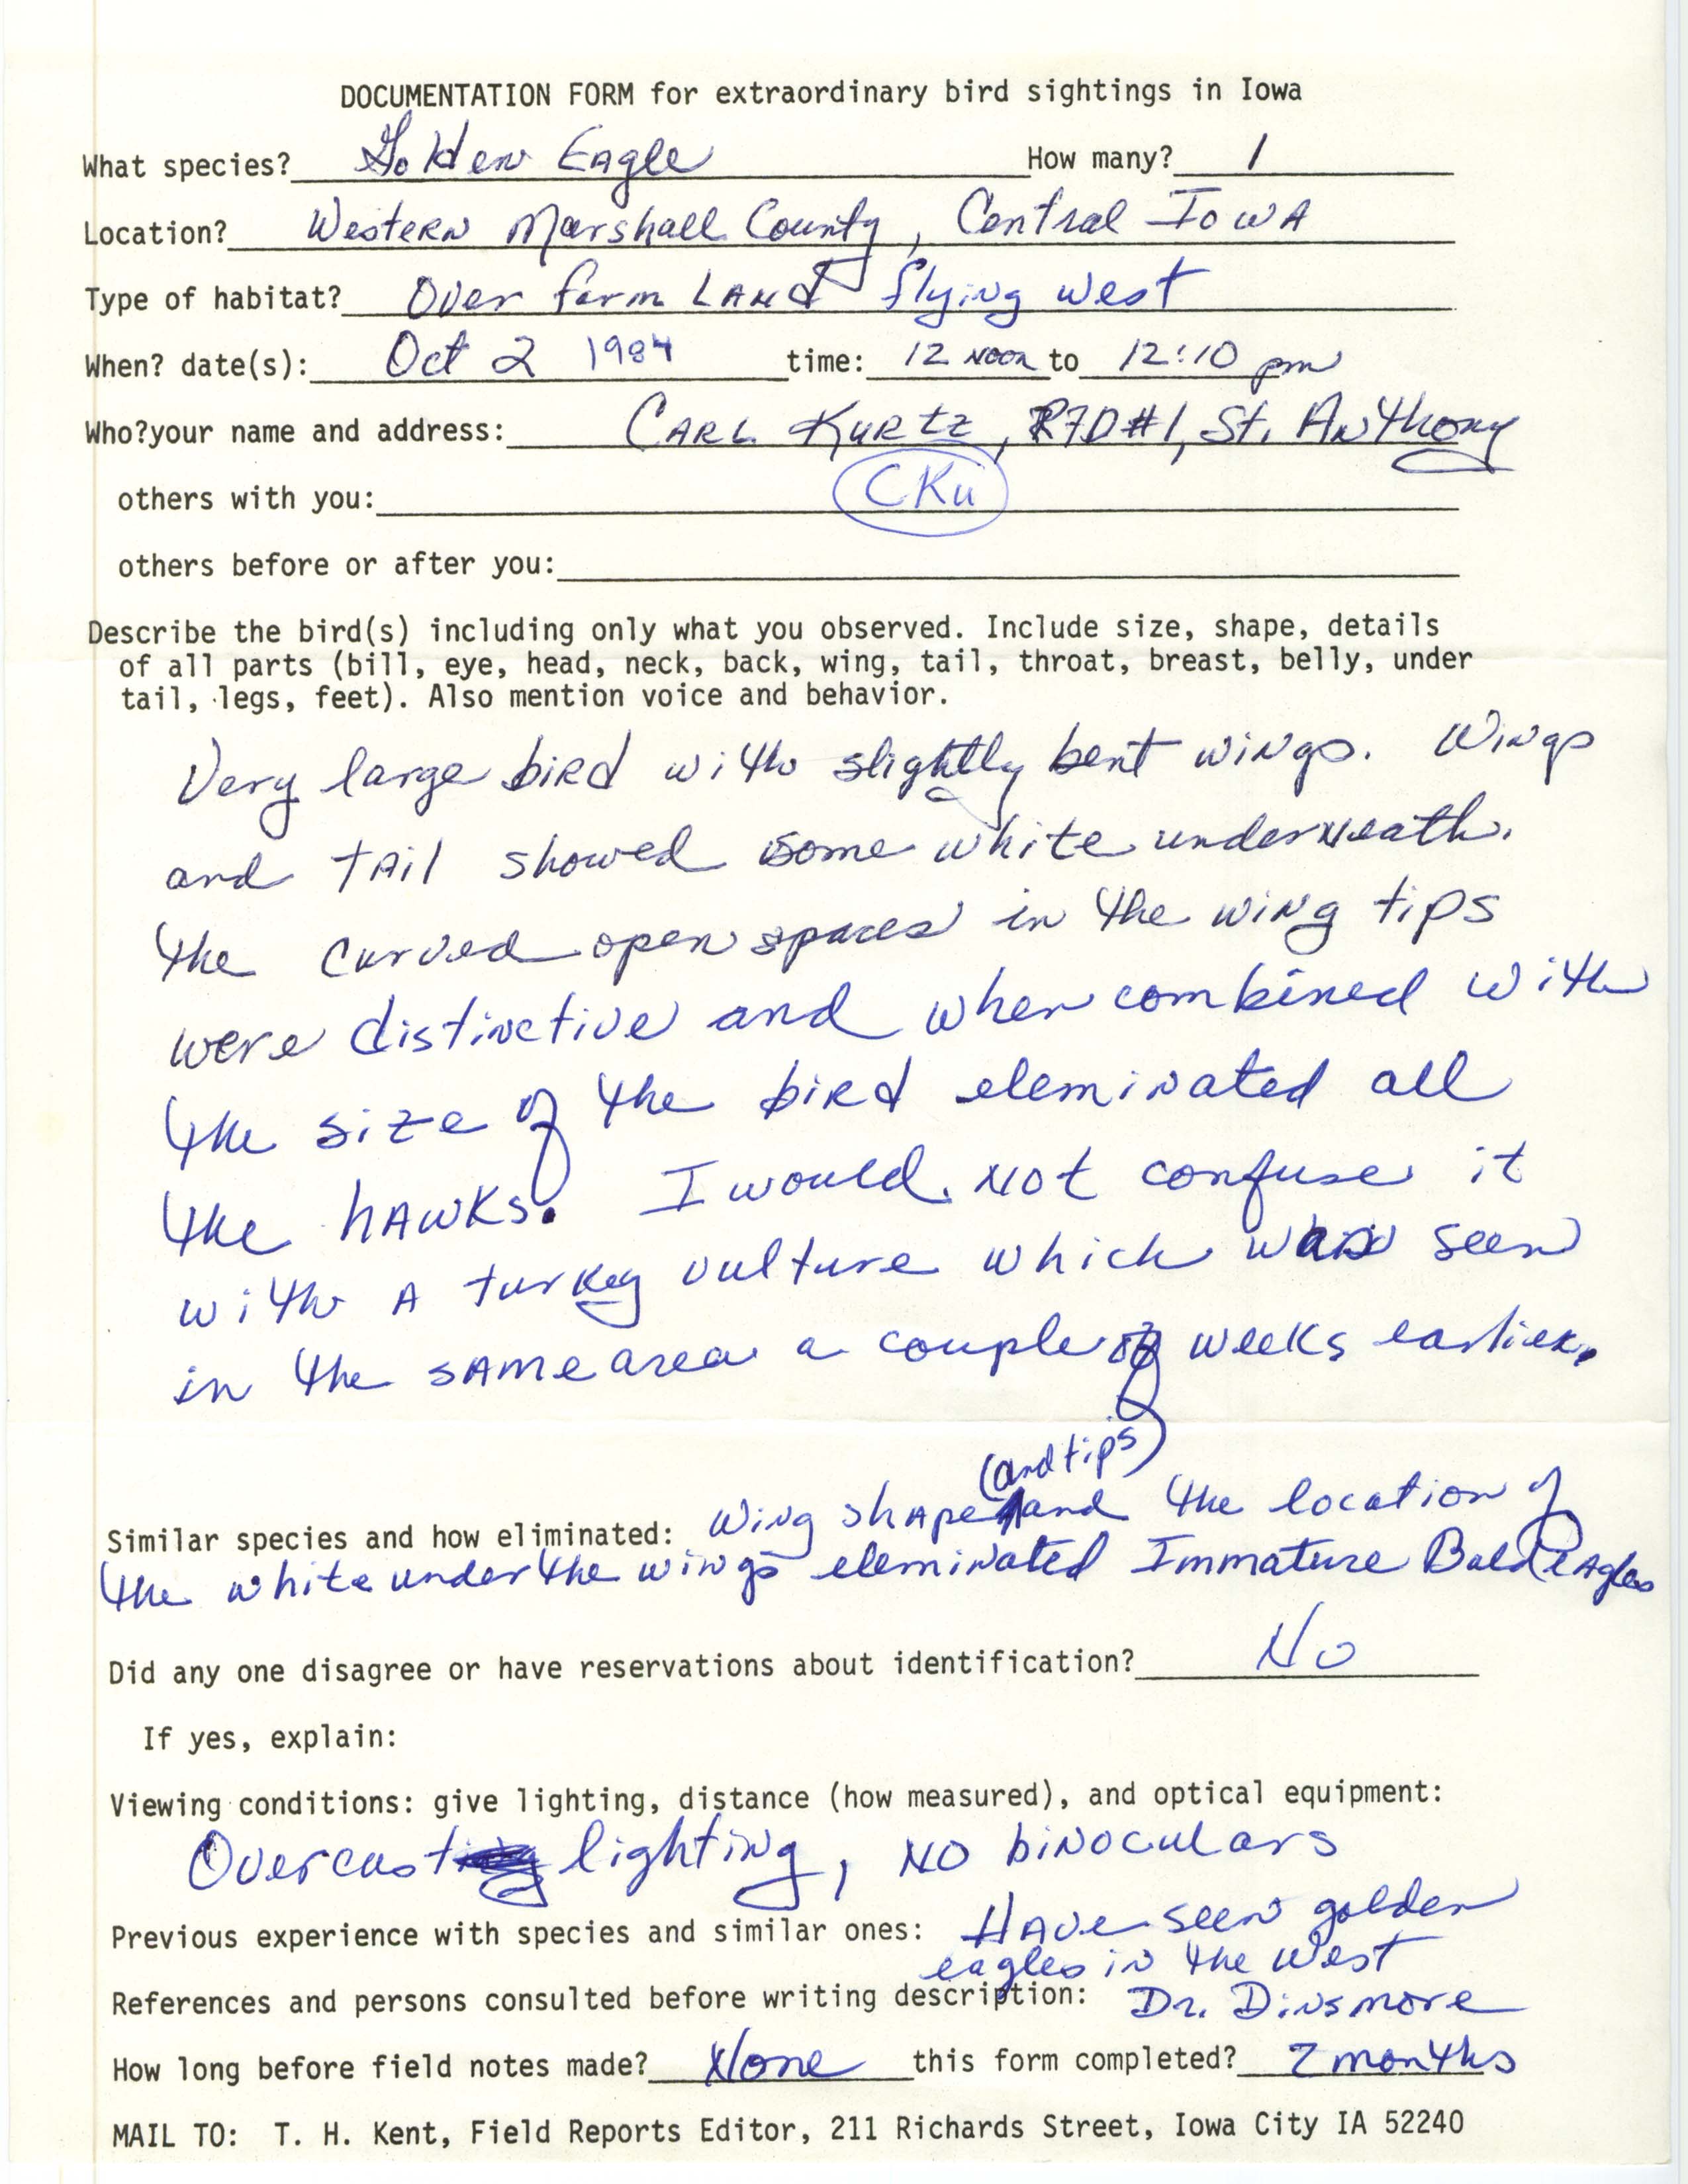 Rare bird documentation form for Golden Eagle in western Marshall County in 1984